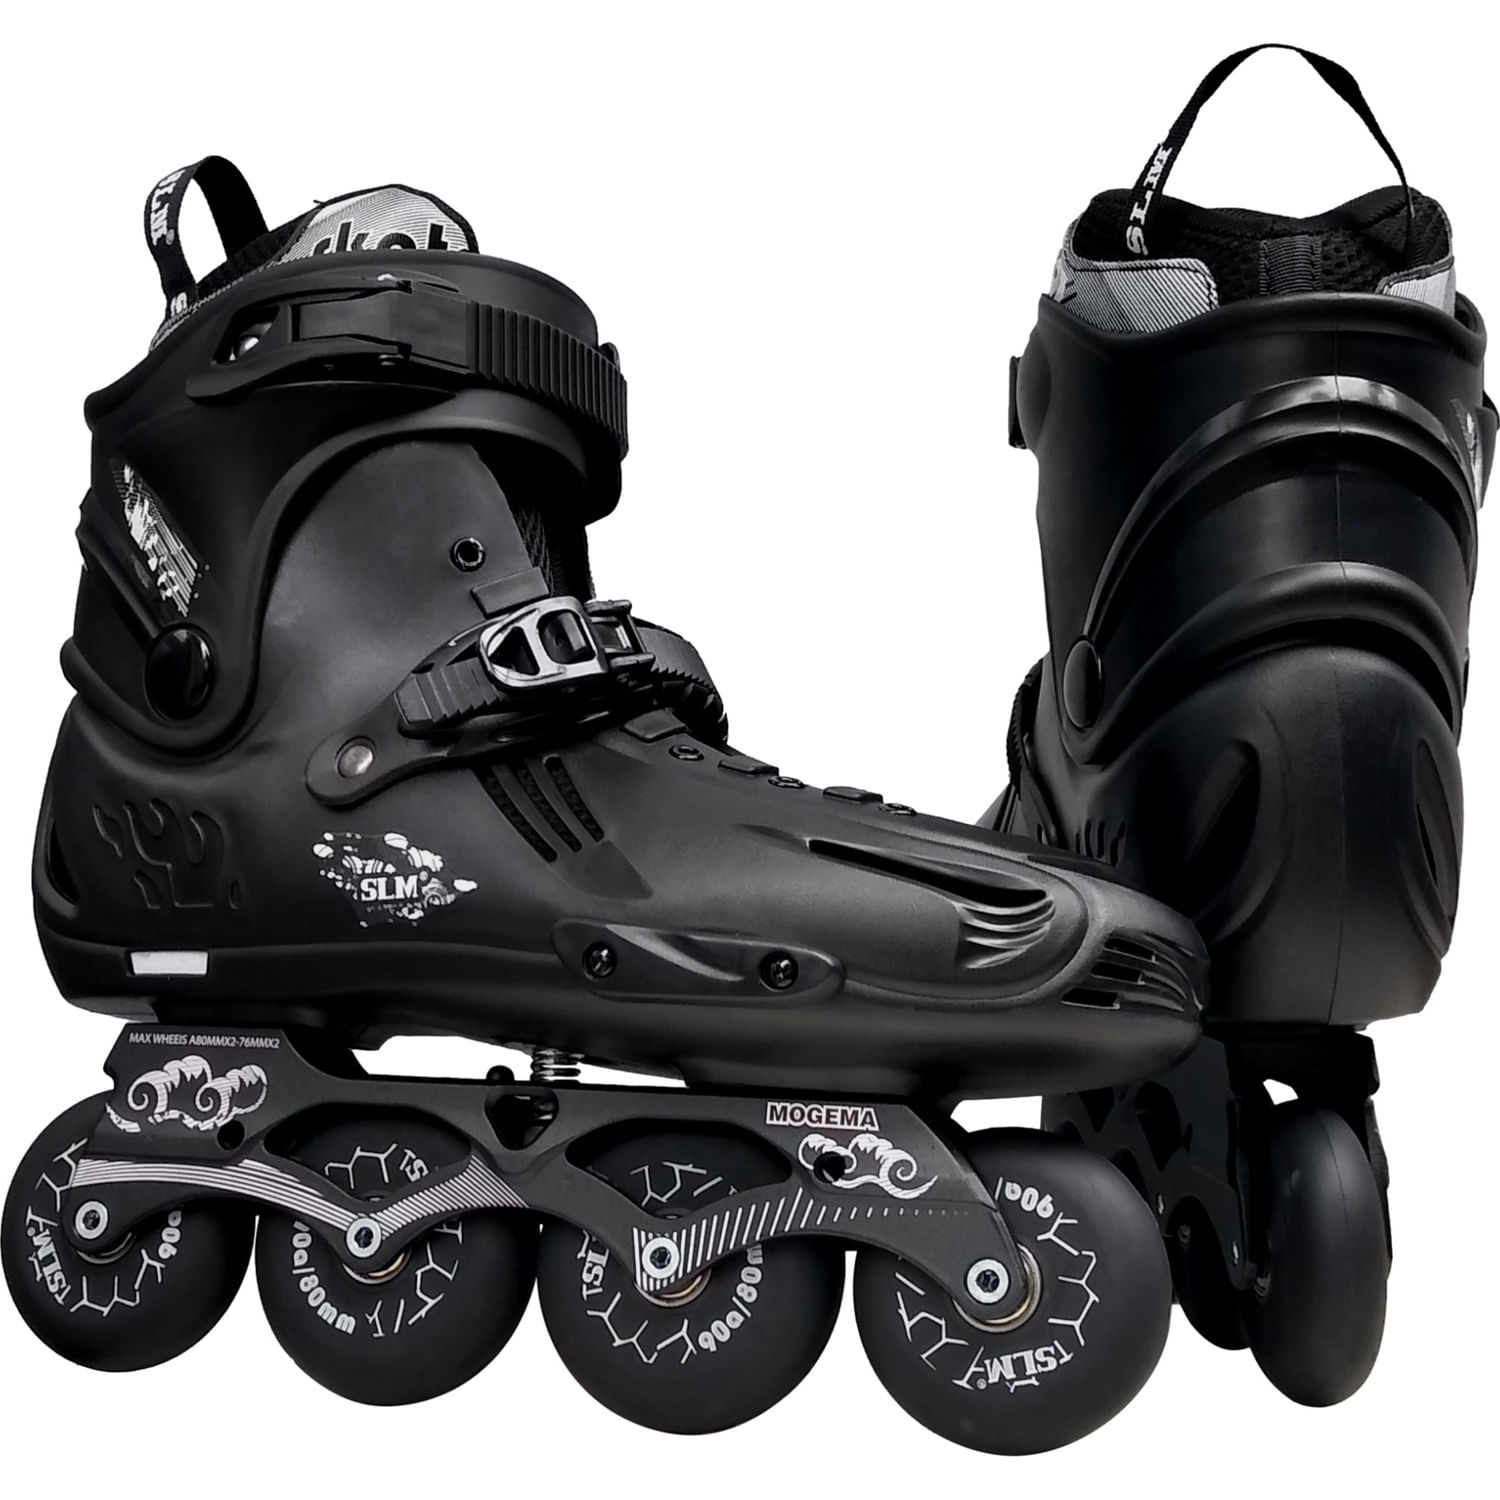 Patines Lineales T/43 SLM Freestyle Profesionales